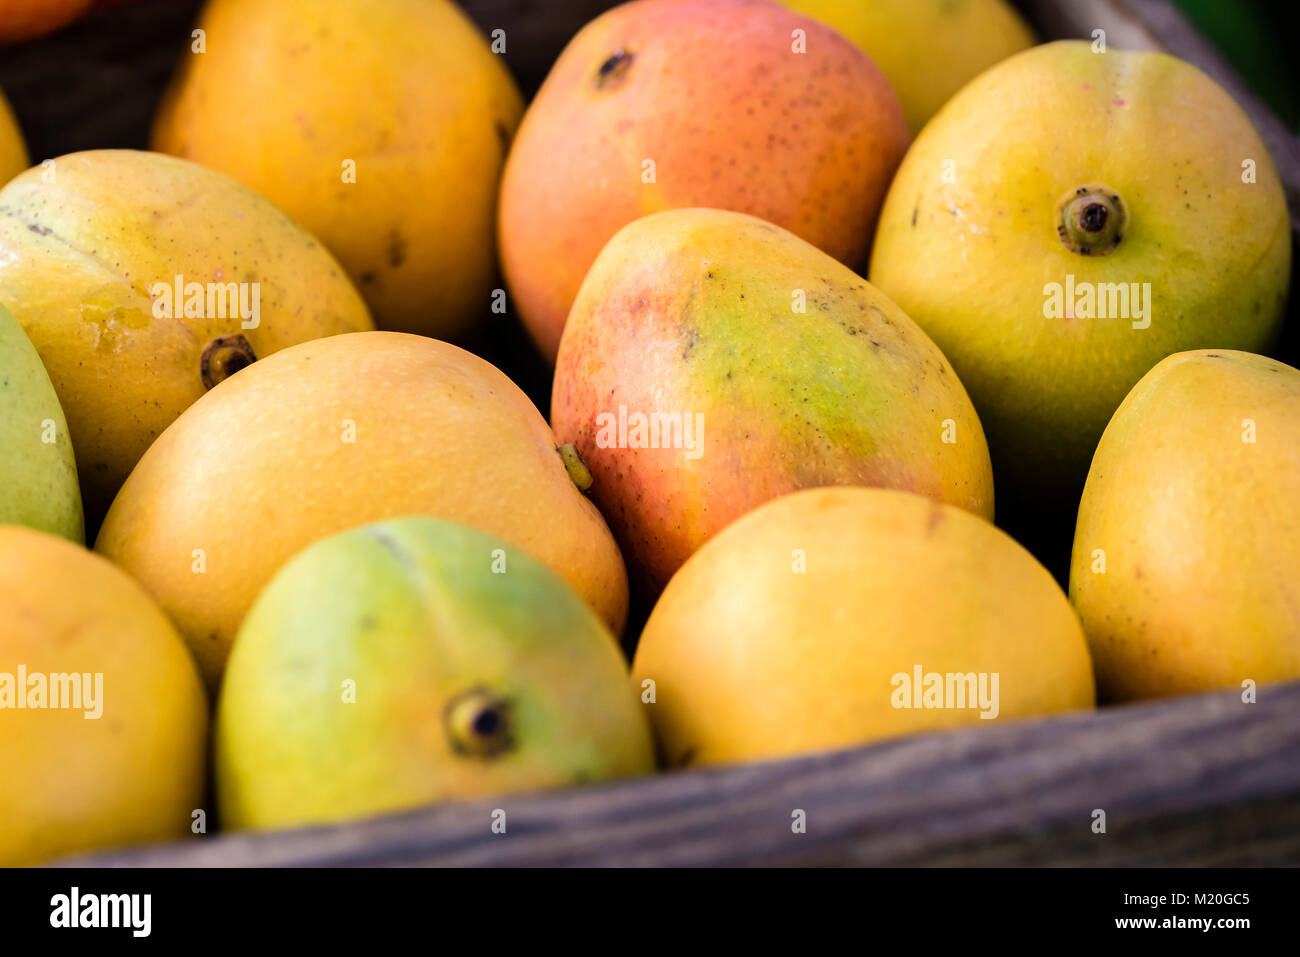 Fresh mango fruit in wooden box, full frame, closeup. Mangos yellow, red, green color, display at local market stall in Sydney, Australia. Stock Photo